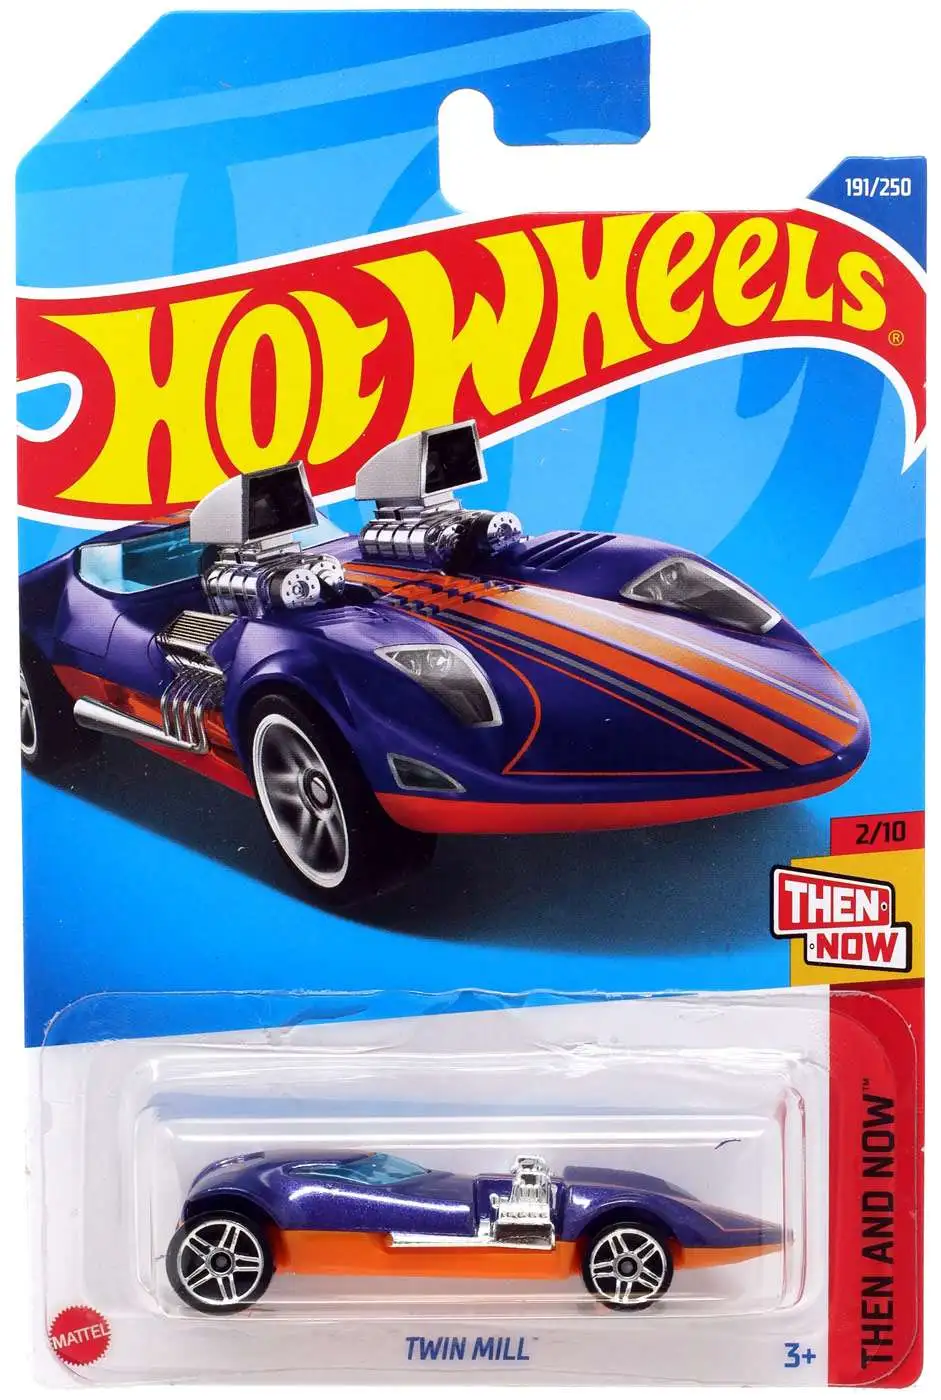 Hot Wheels Then And Now Twin Mill 164 Diecast Car 210 Mattel Toys Toywiz